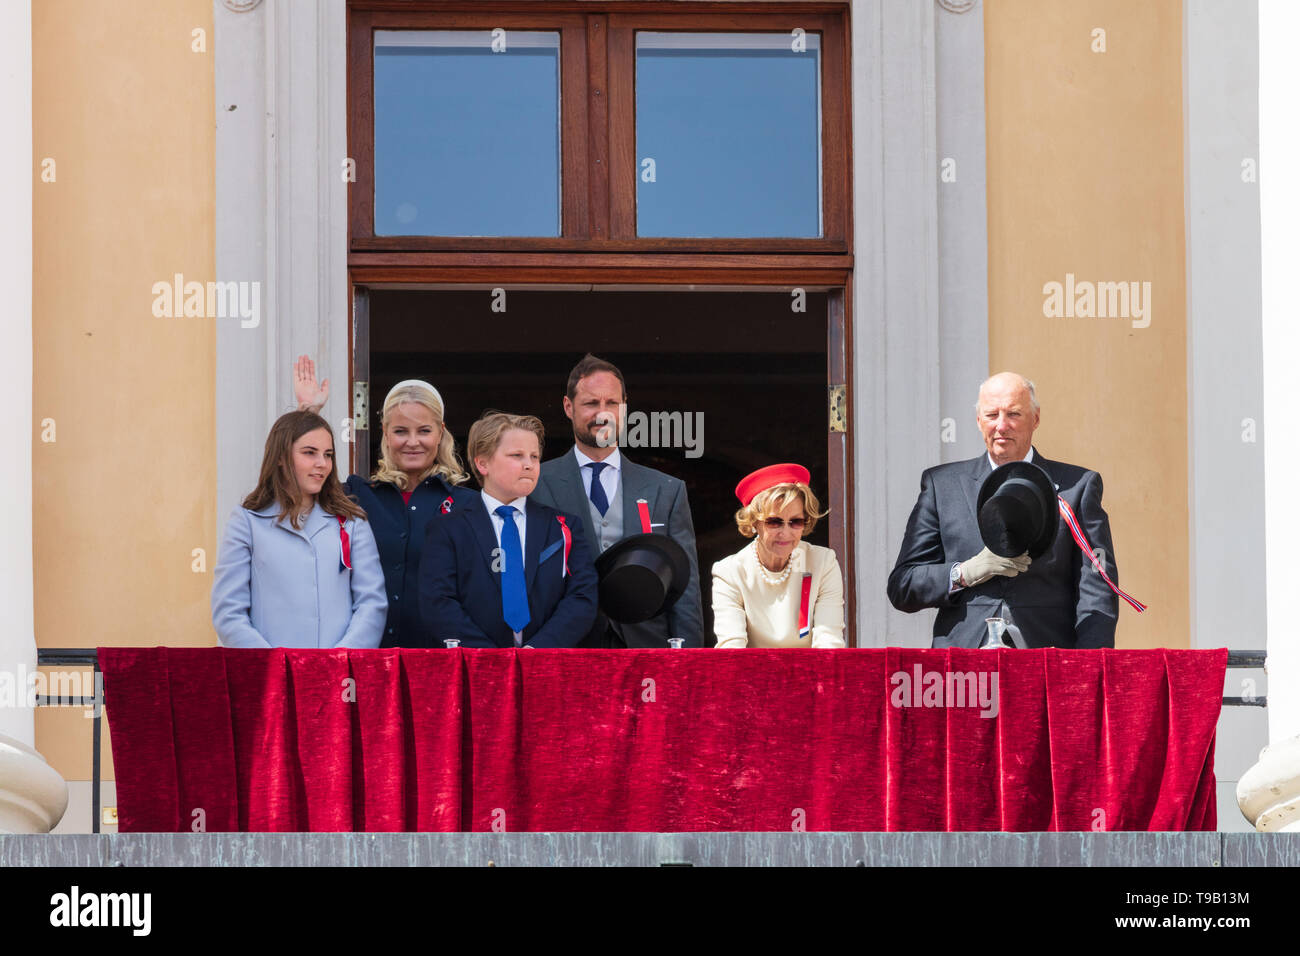 Norway, Oslo - May 17, 2019. The people is greeted by the royal family who are waving to the crowds from the Royal Palace balcony during the Norwegian Constitution Day, also referred to as Sytttende Mai, in central Oslo. (L-R) Princess Ingrid Alexandra, Mette-Marit, Crown Princess of Norway, Prince Sverre Magnus of Norway, Haakon, Crown Prince of Norway, Queen Sonja of Norway and King Harald V. (Photo credit: Gonzales Photo - Stian S. Moller). Stock Photo